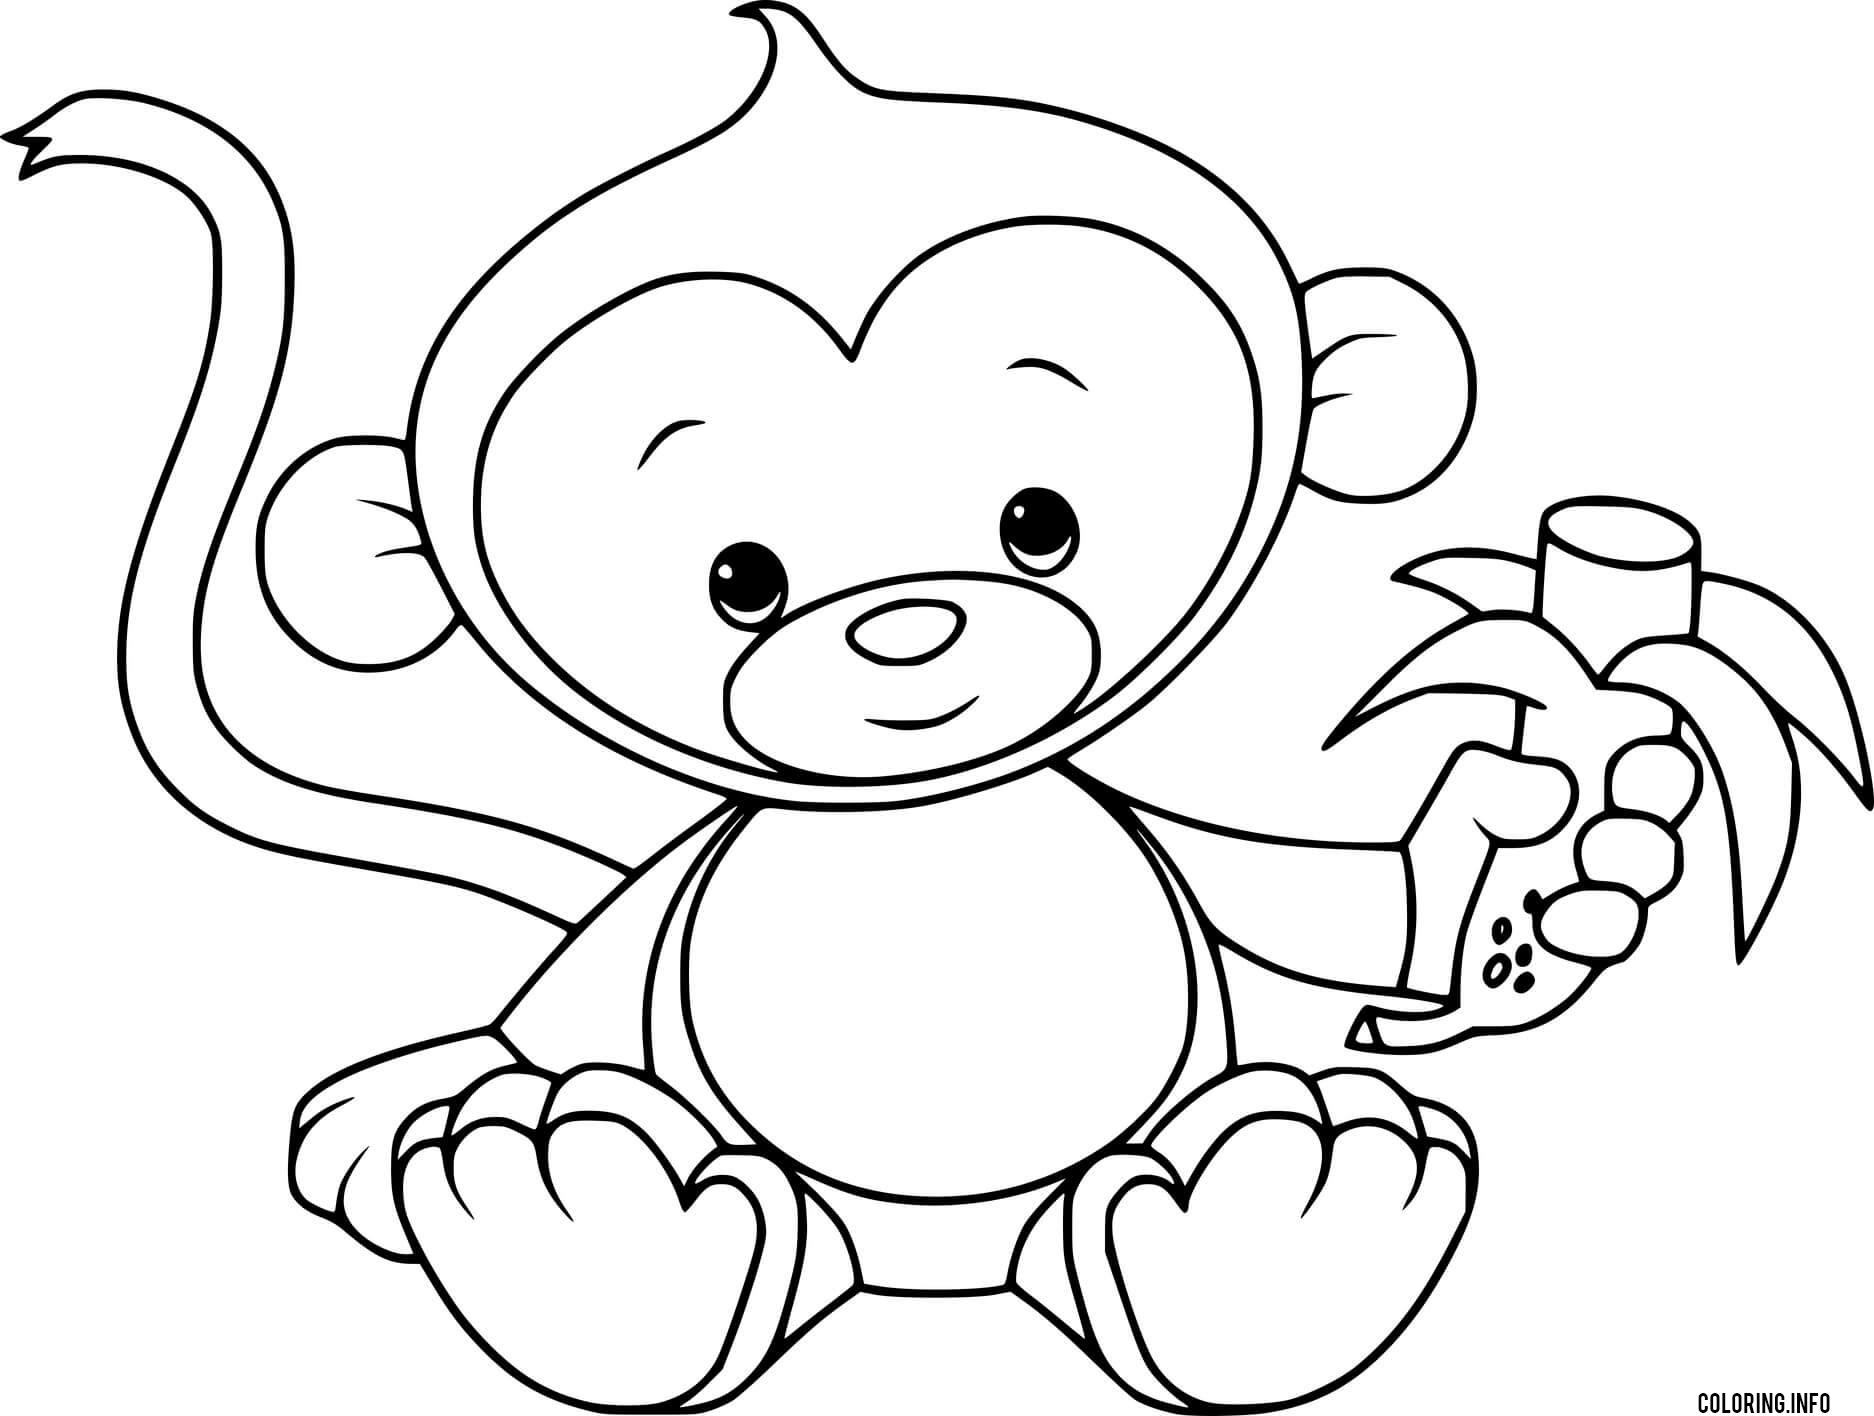 Cute Monkey With Bananas Coloring Page Free Printable Coloring Pages